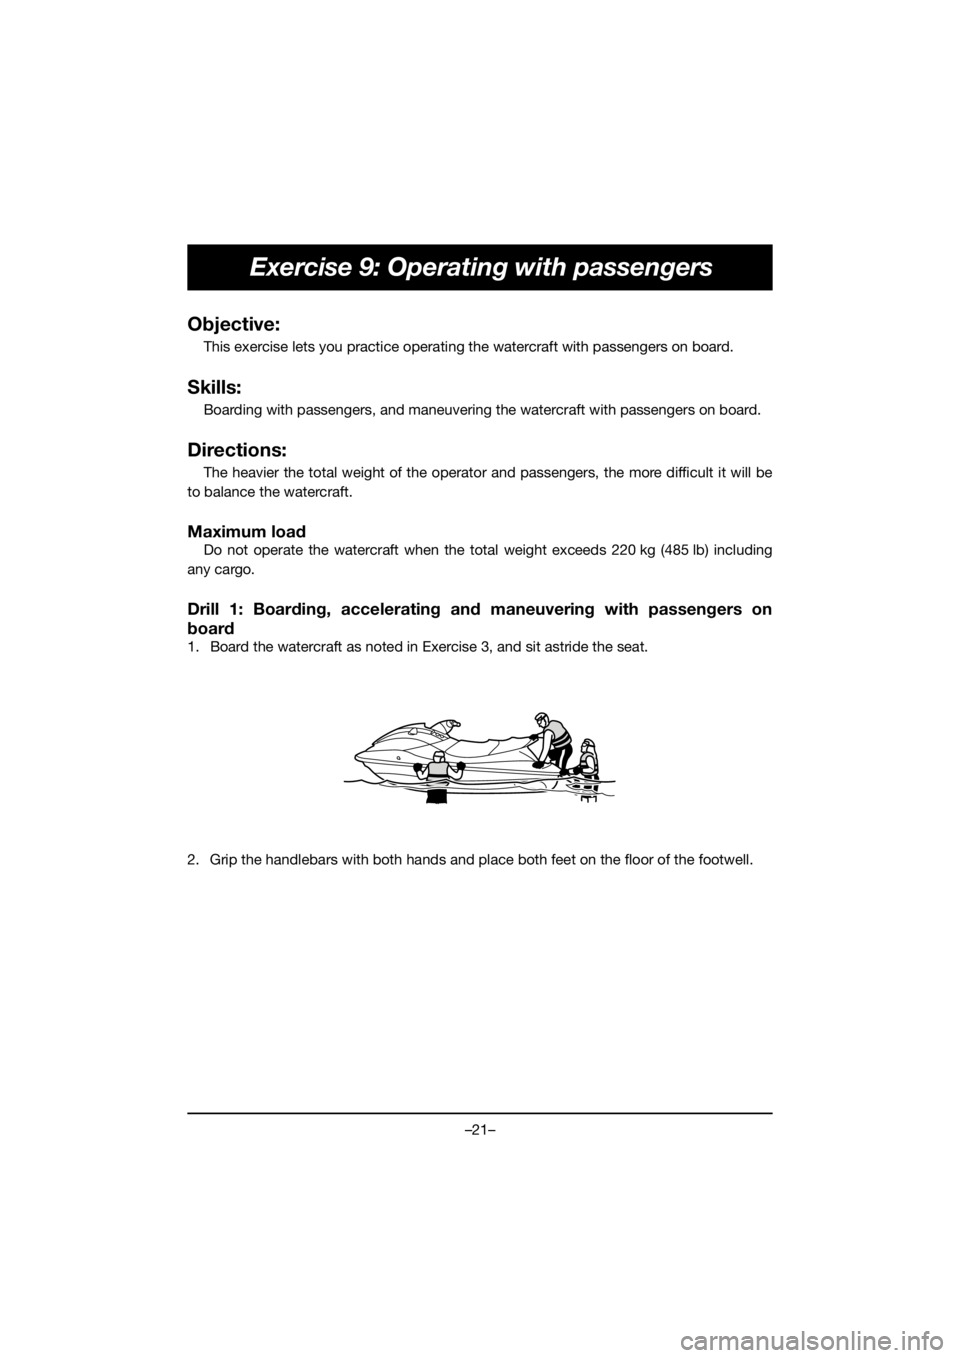 YAMAHA EX SPORT 2020  Manual de utilização (in Portuguese) –21–
Exercise 9: Operating with passengers
Objective:
This exercise lets you practice operating the watercraft with passengers on board.
Skills:
Boarding with passengers, and maneuvering the water